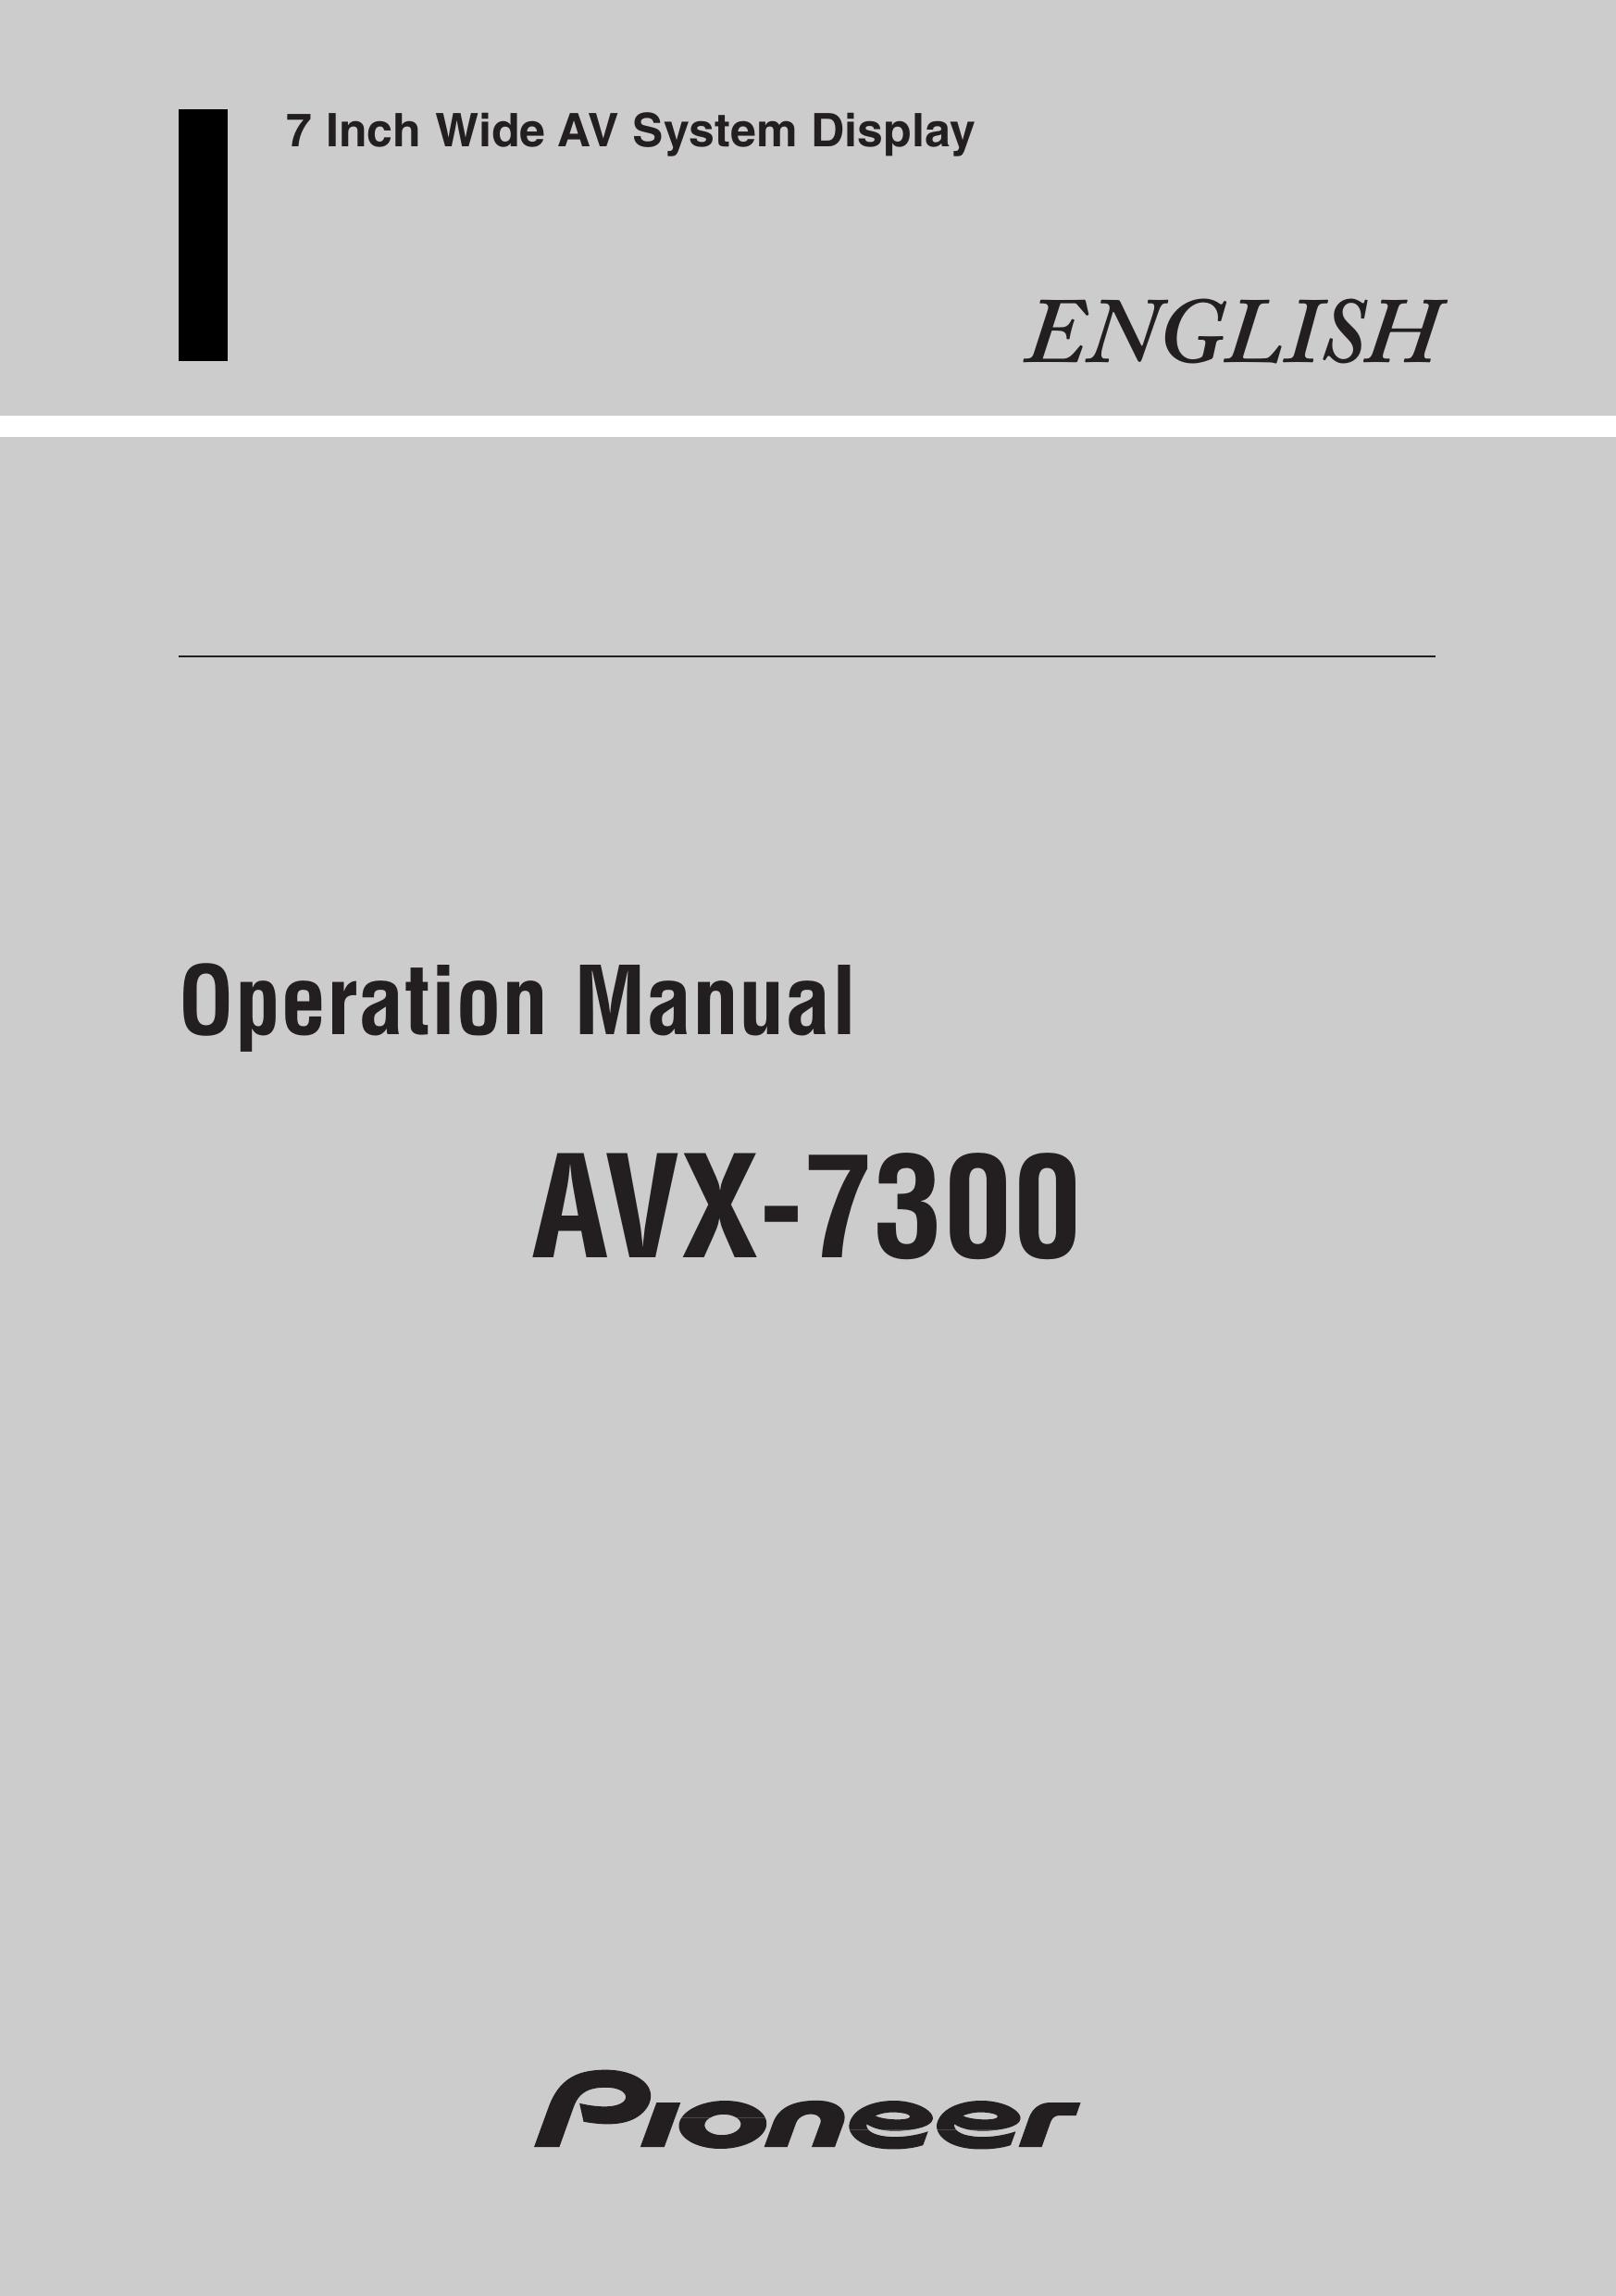 2Wire AVX-7300 Gas Grill User Manual